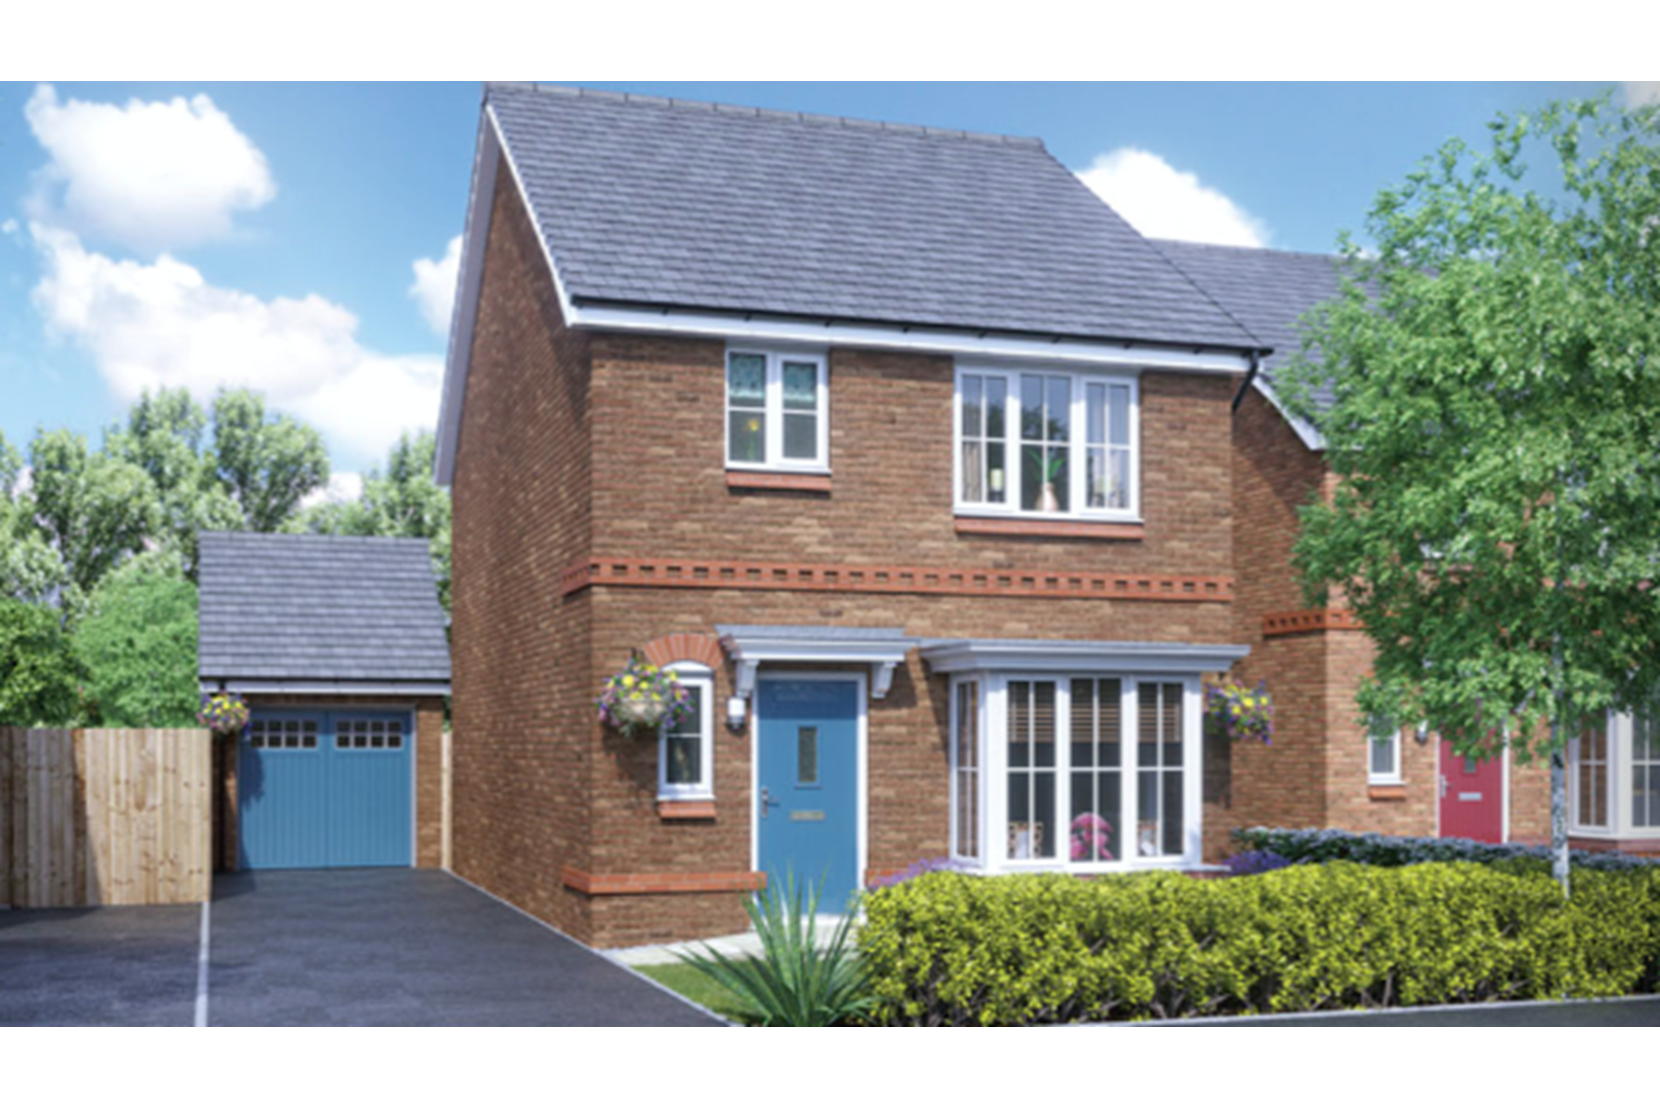 Houses to Rent by Simple Life in Siskin Park, Wynyard, Stockton-on-Tees, TS22, development panoramic